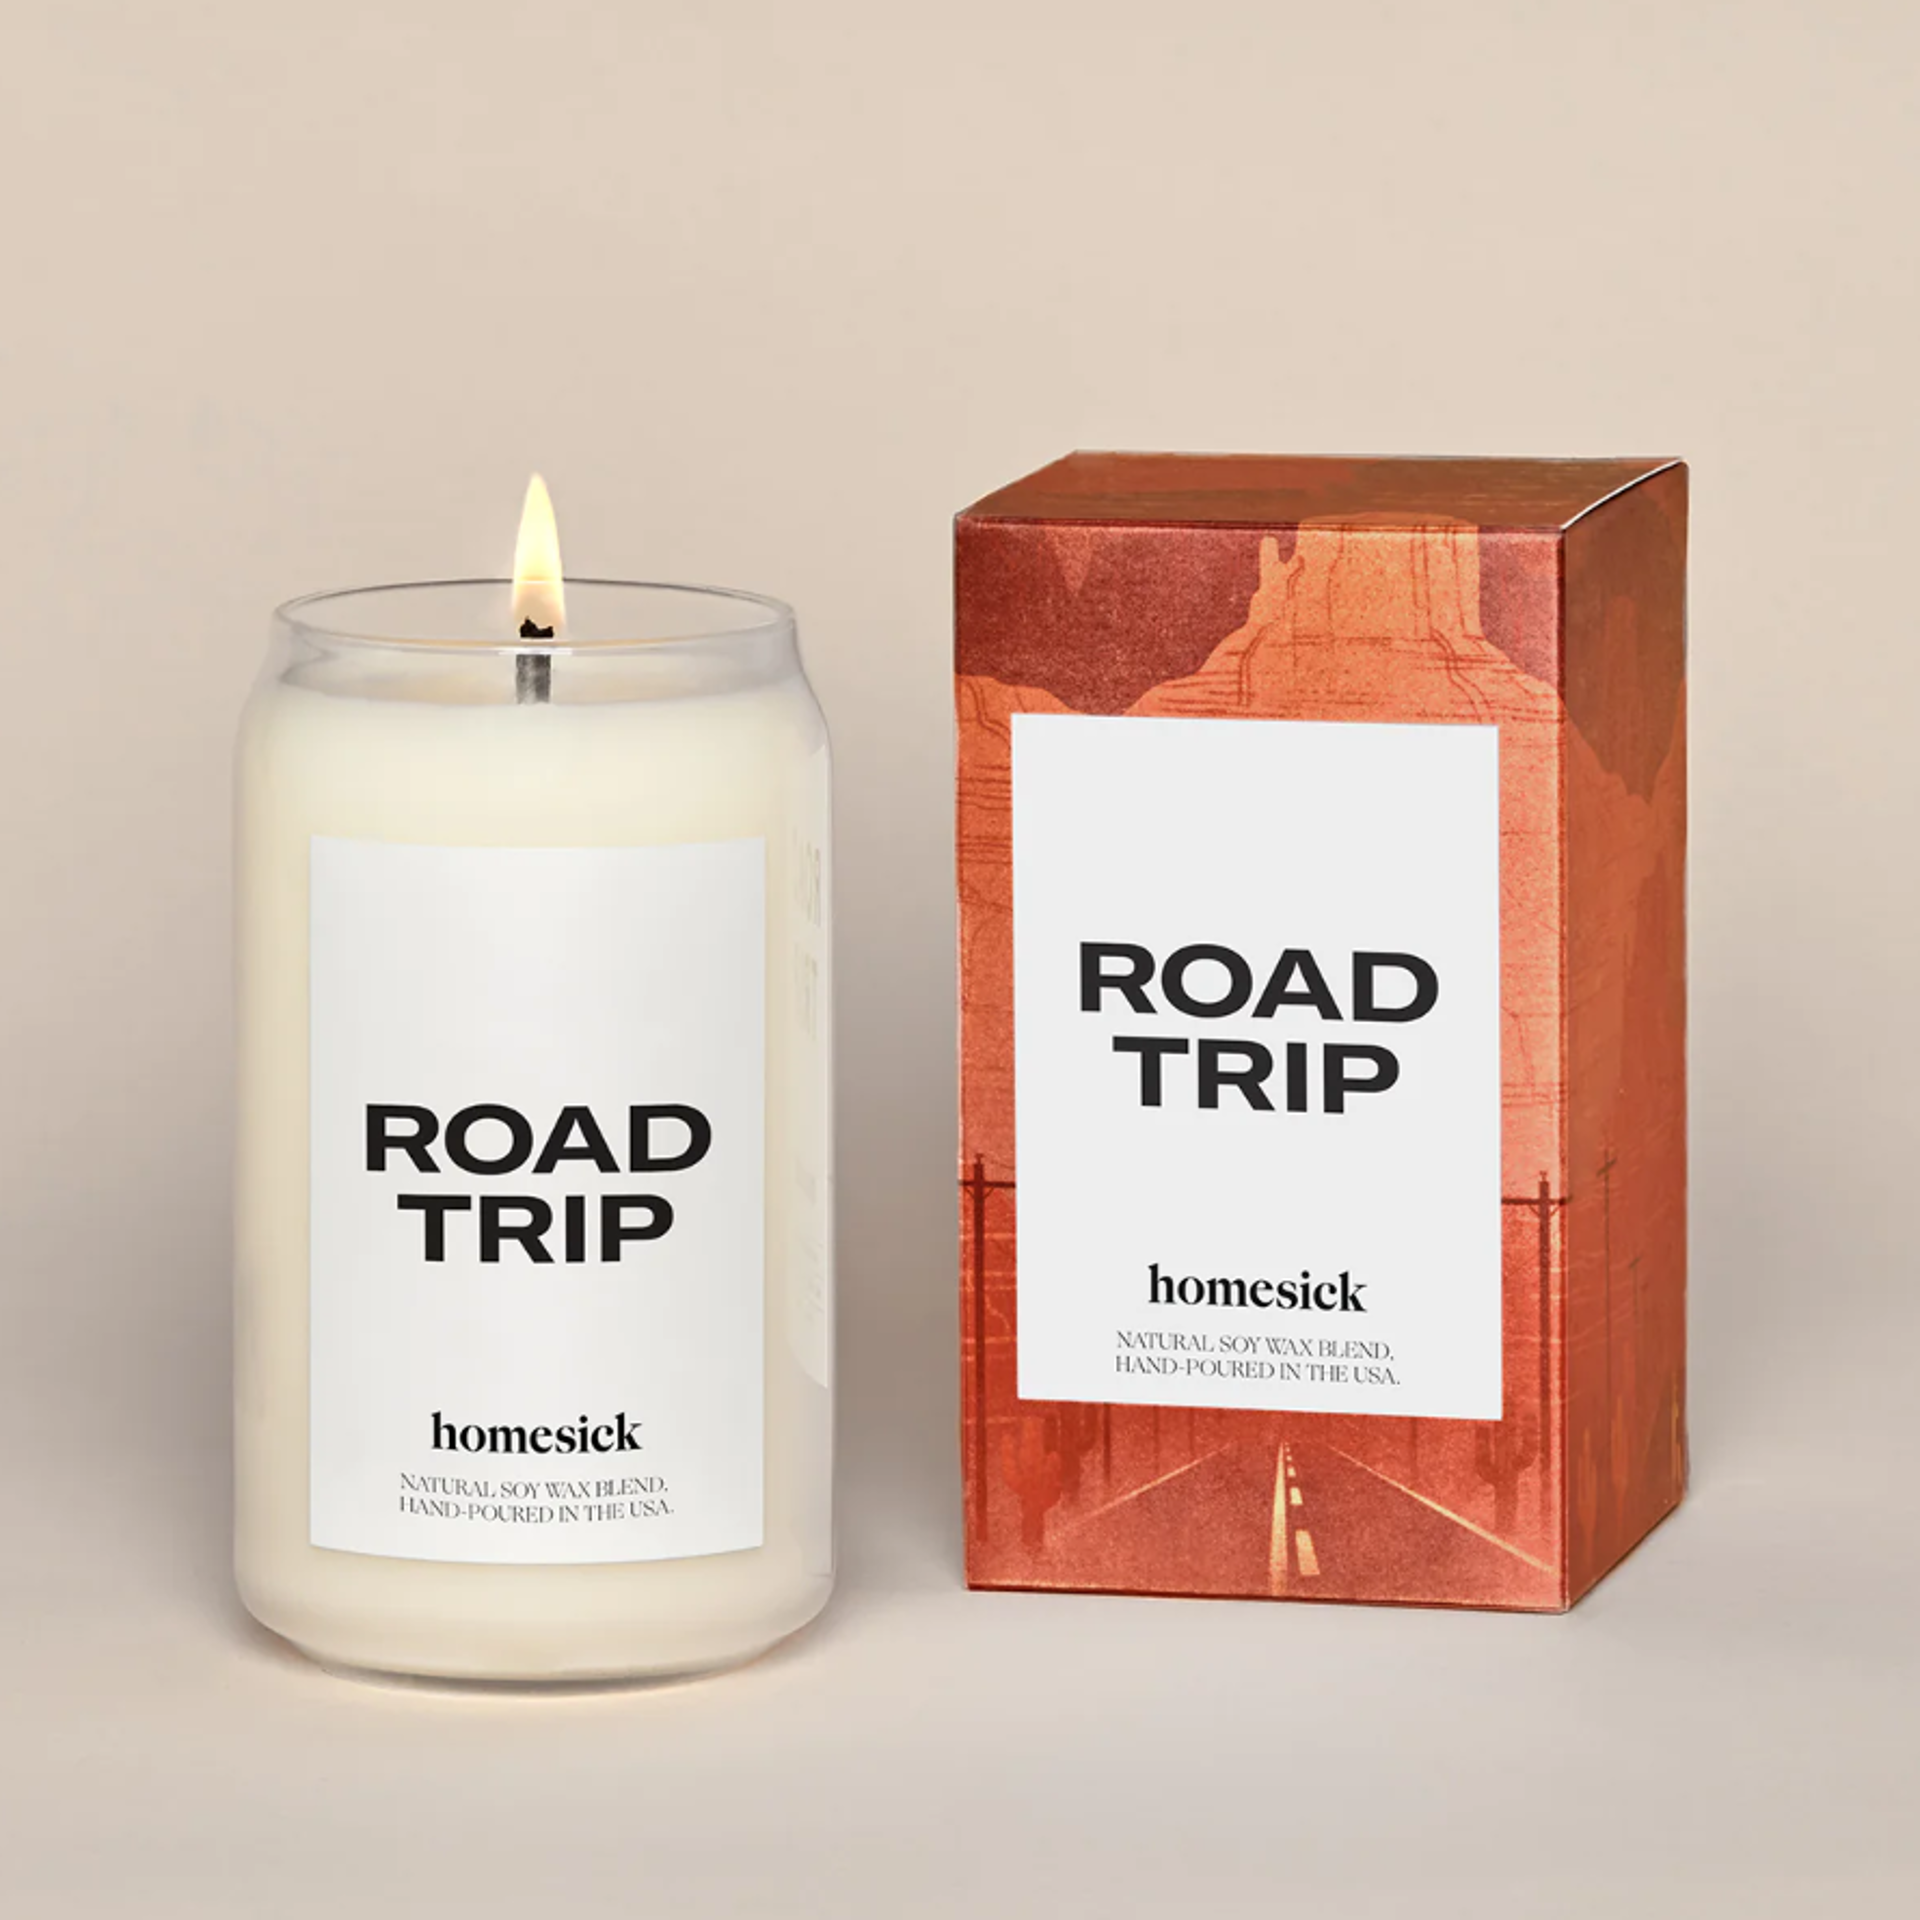 Road Trip Candle by Chauvet Arts